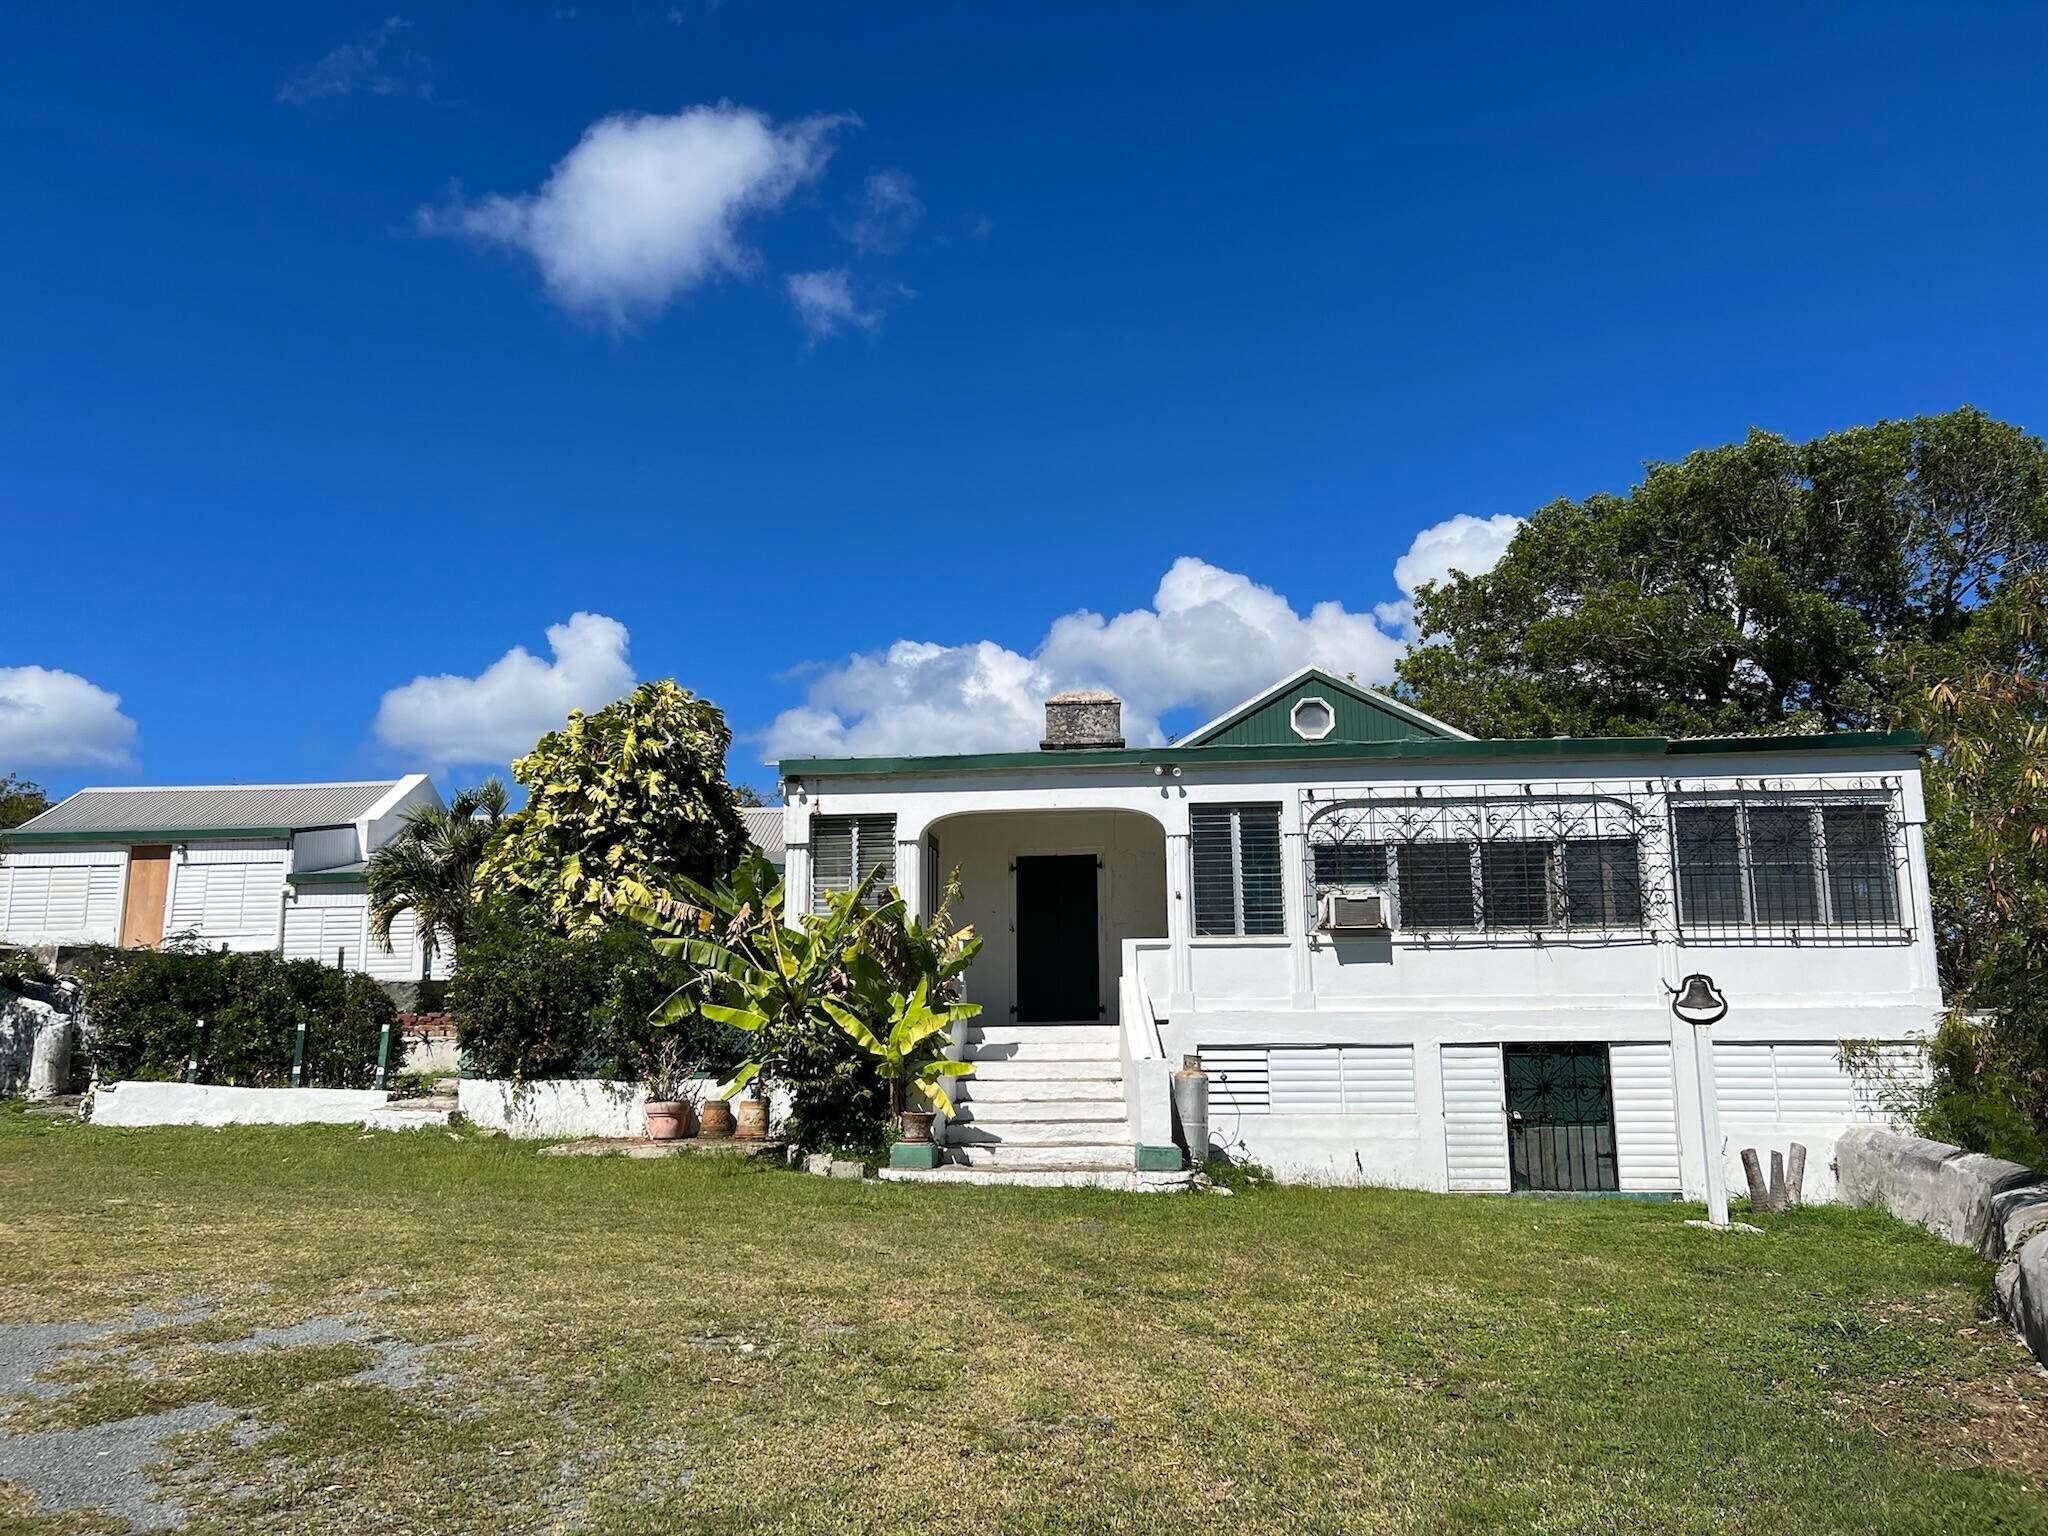 Multi-Family Homes for Sale at 196 Clifton Hill KI St Croix, Virgin Islands 00820 United States Virgin Islands